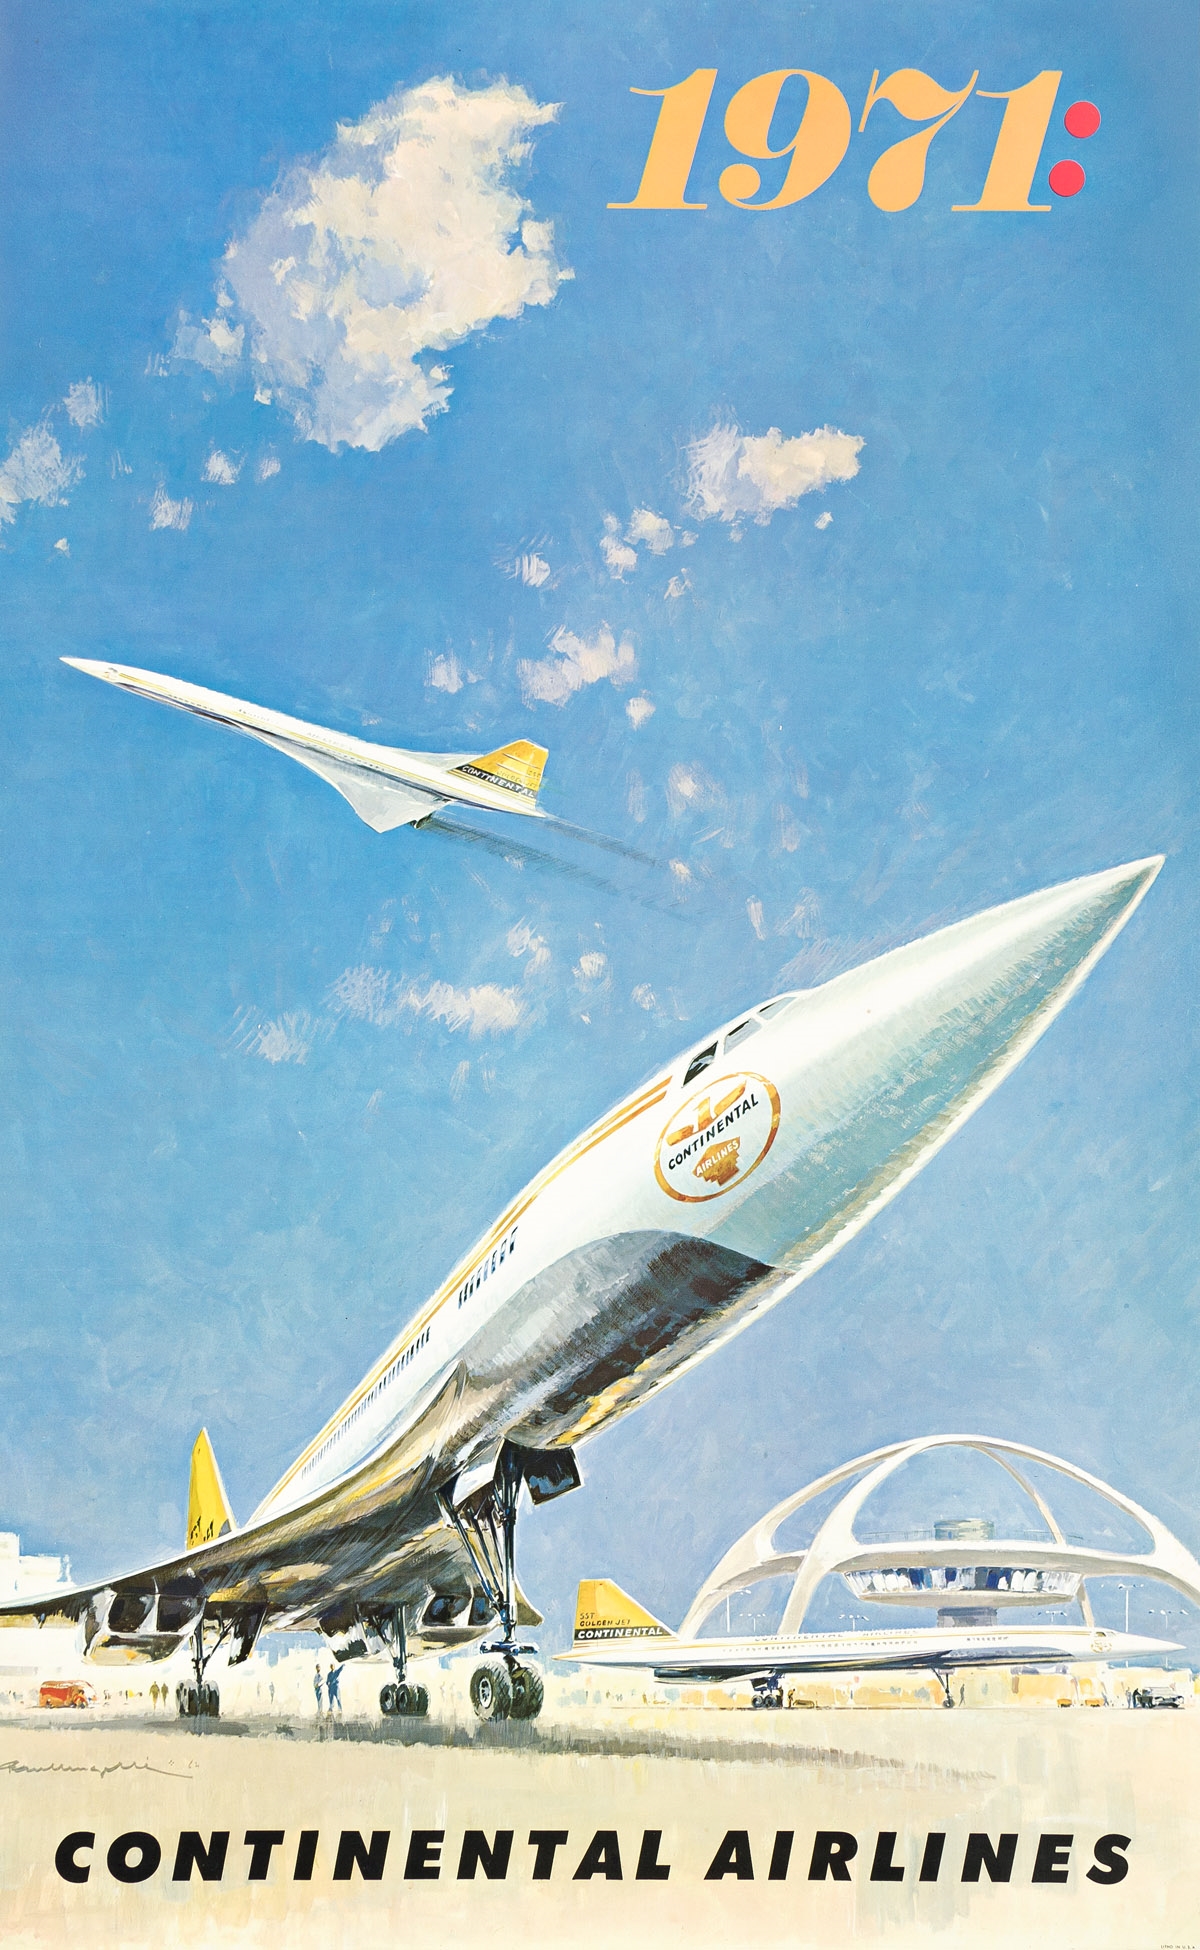 Paul Lengelle | 1971: CONTINENTAL AIRLINES. | MutualArt